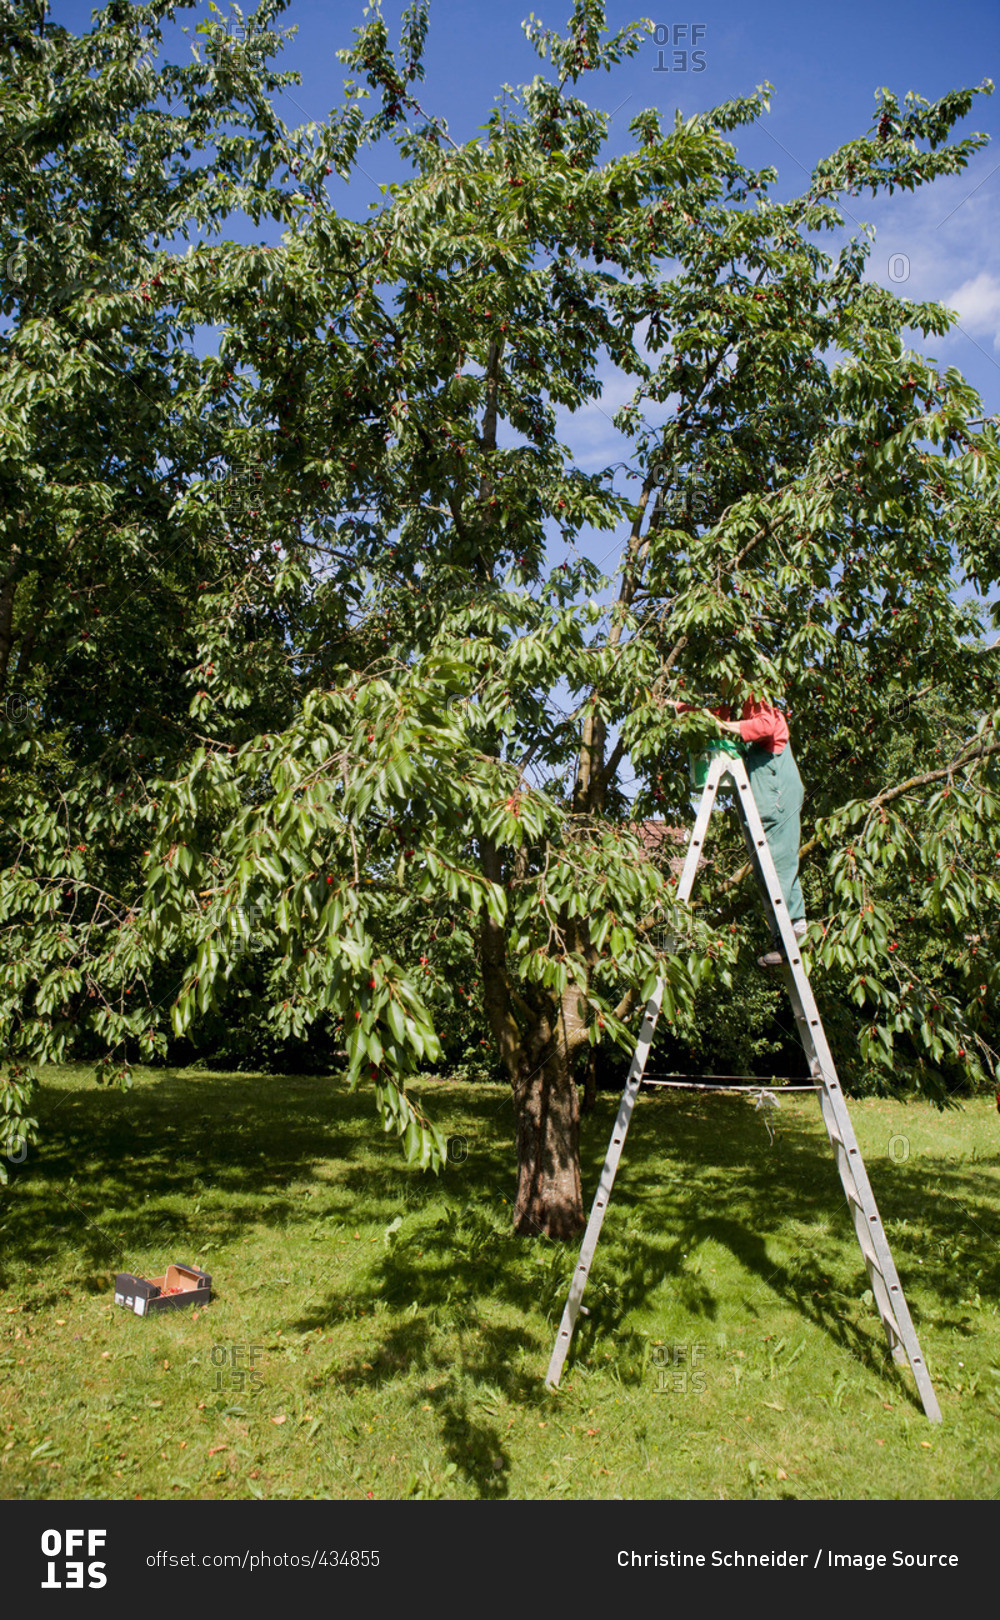 Woman pruning trees on ladder